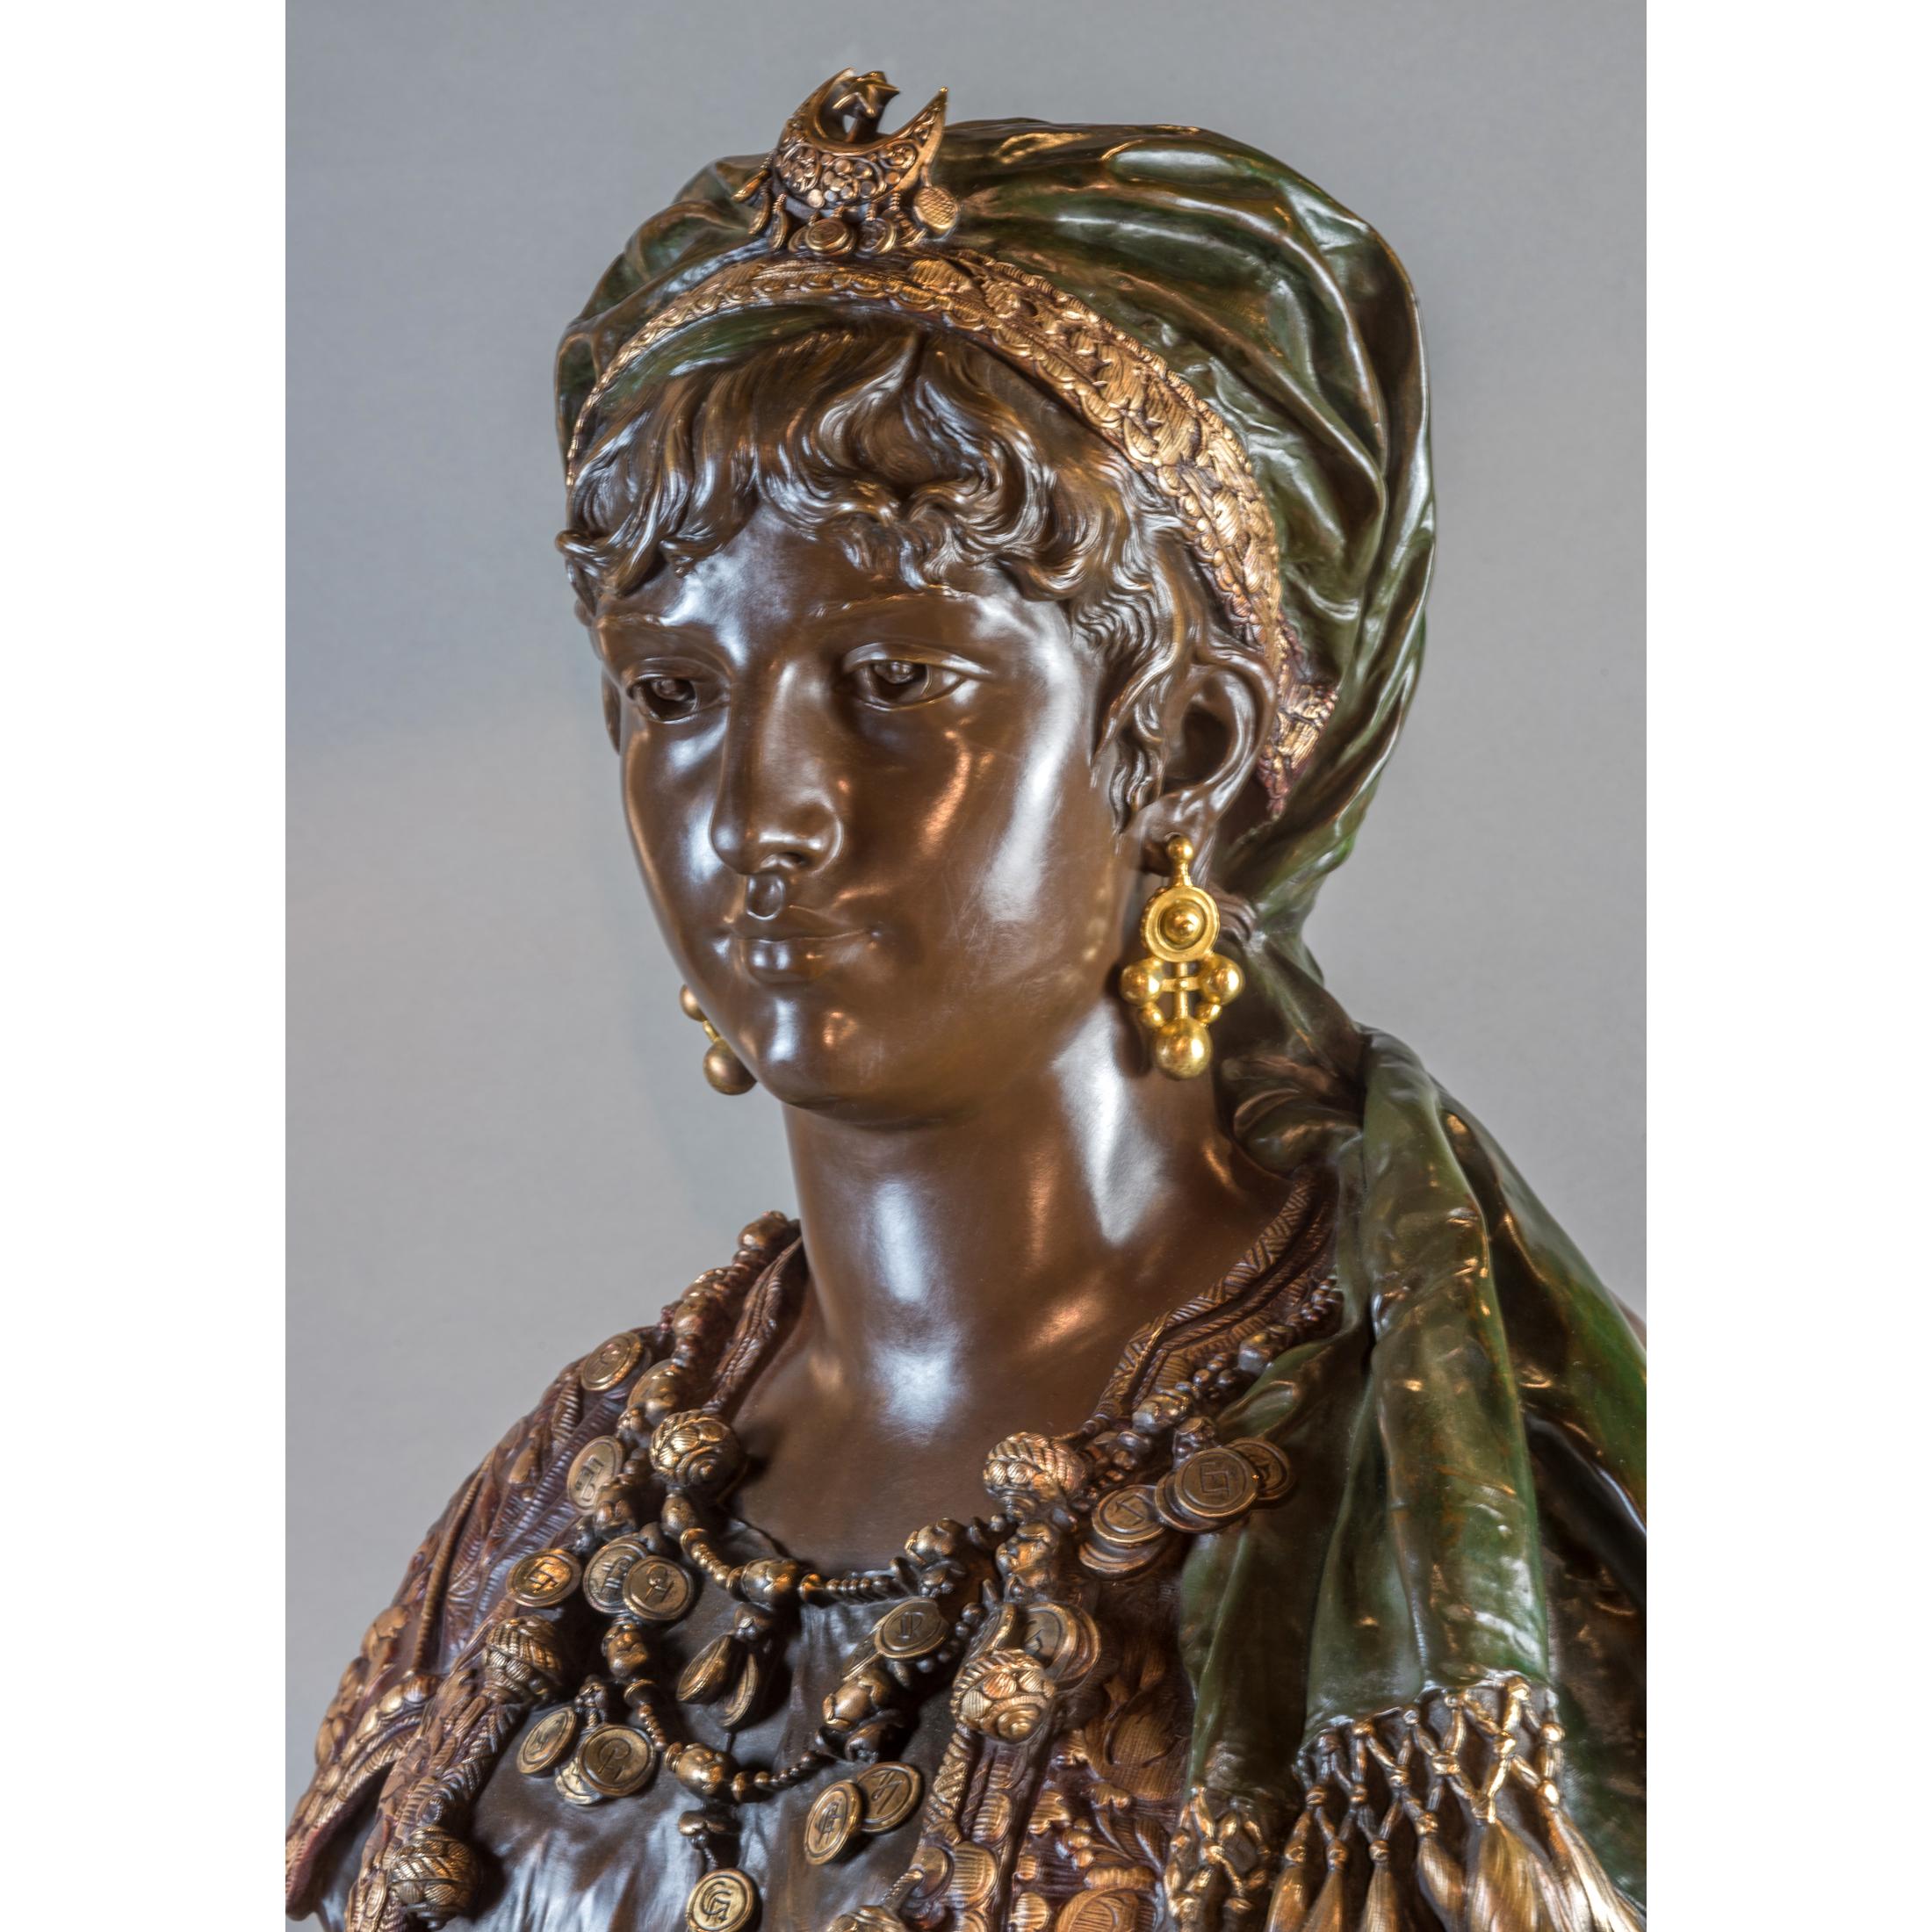 Pair of Polychrome-Patinated and Gilt Bronze Orientalist Princess Busts - Gold Figurative Sculpture by Adrien-Etienne Gaudez